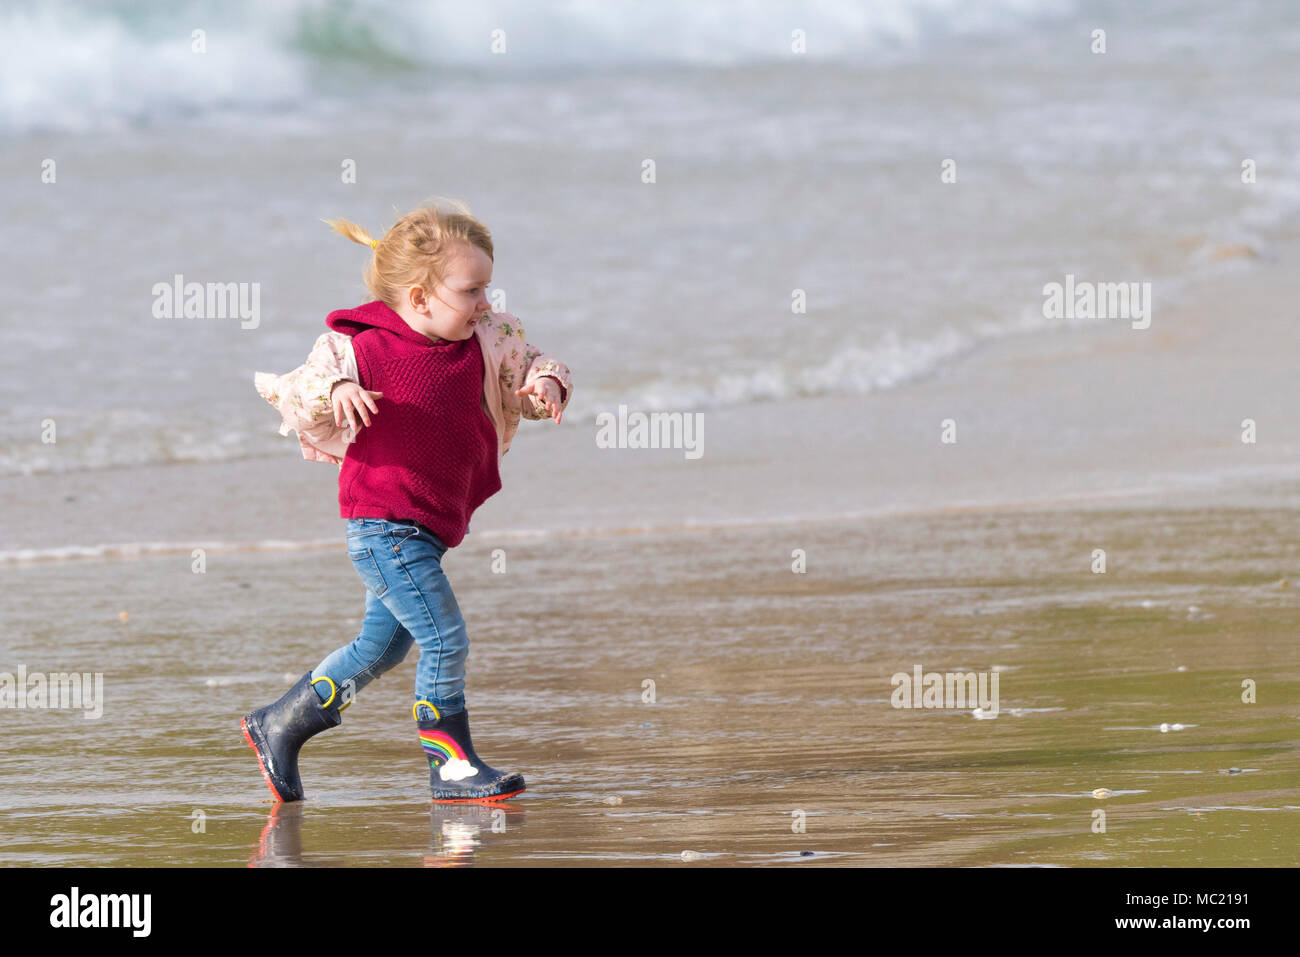 A little girl running on a Fistral beach in Newquay Cornwall. Stock Photo